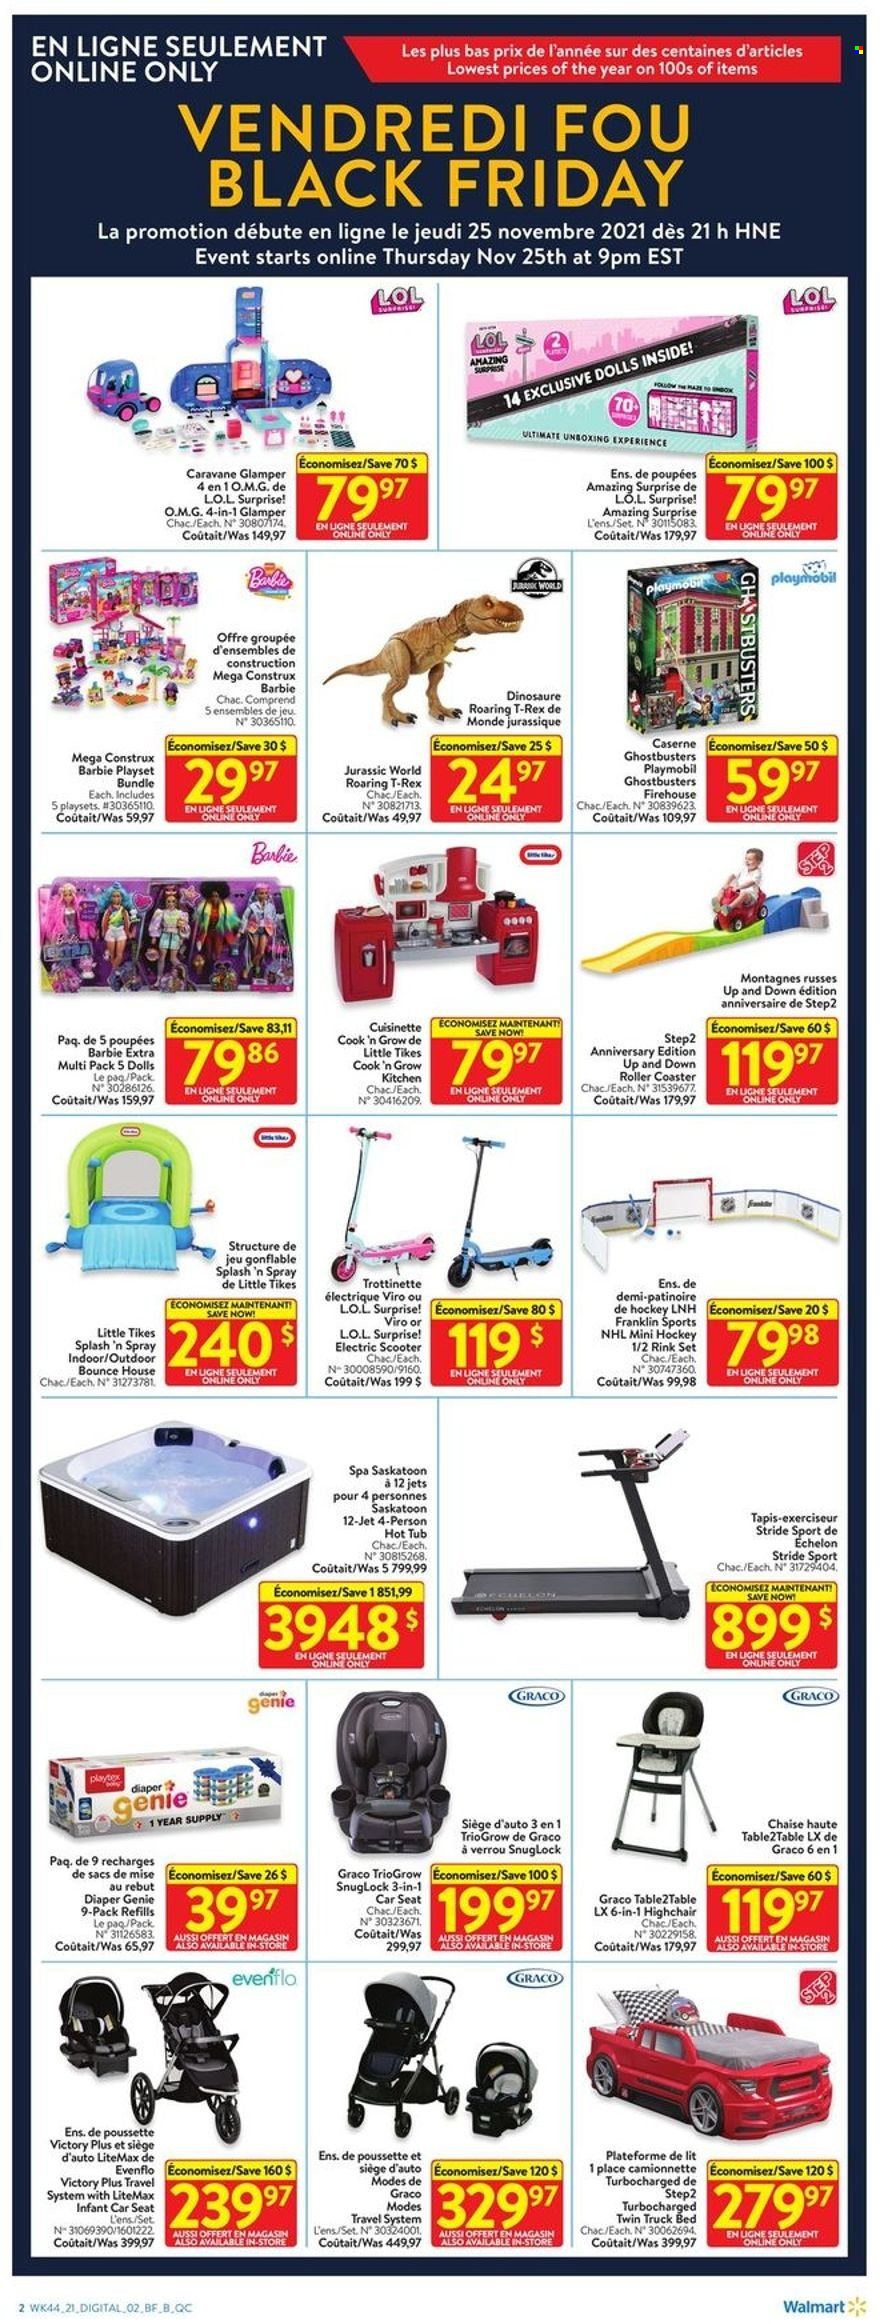 thumbnail - Walmart Flyer - November 25, 2021 - November 28, 2021 - Sales products - Bounce, Jet, Playtex, Barbie, roller, electric scooter, high chair, doll, play set, L.O.L. Surprise, Little Tikes, baby car seat, Playmobil. Page 8.